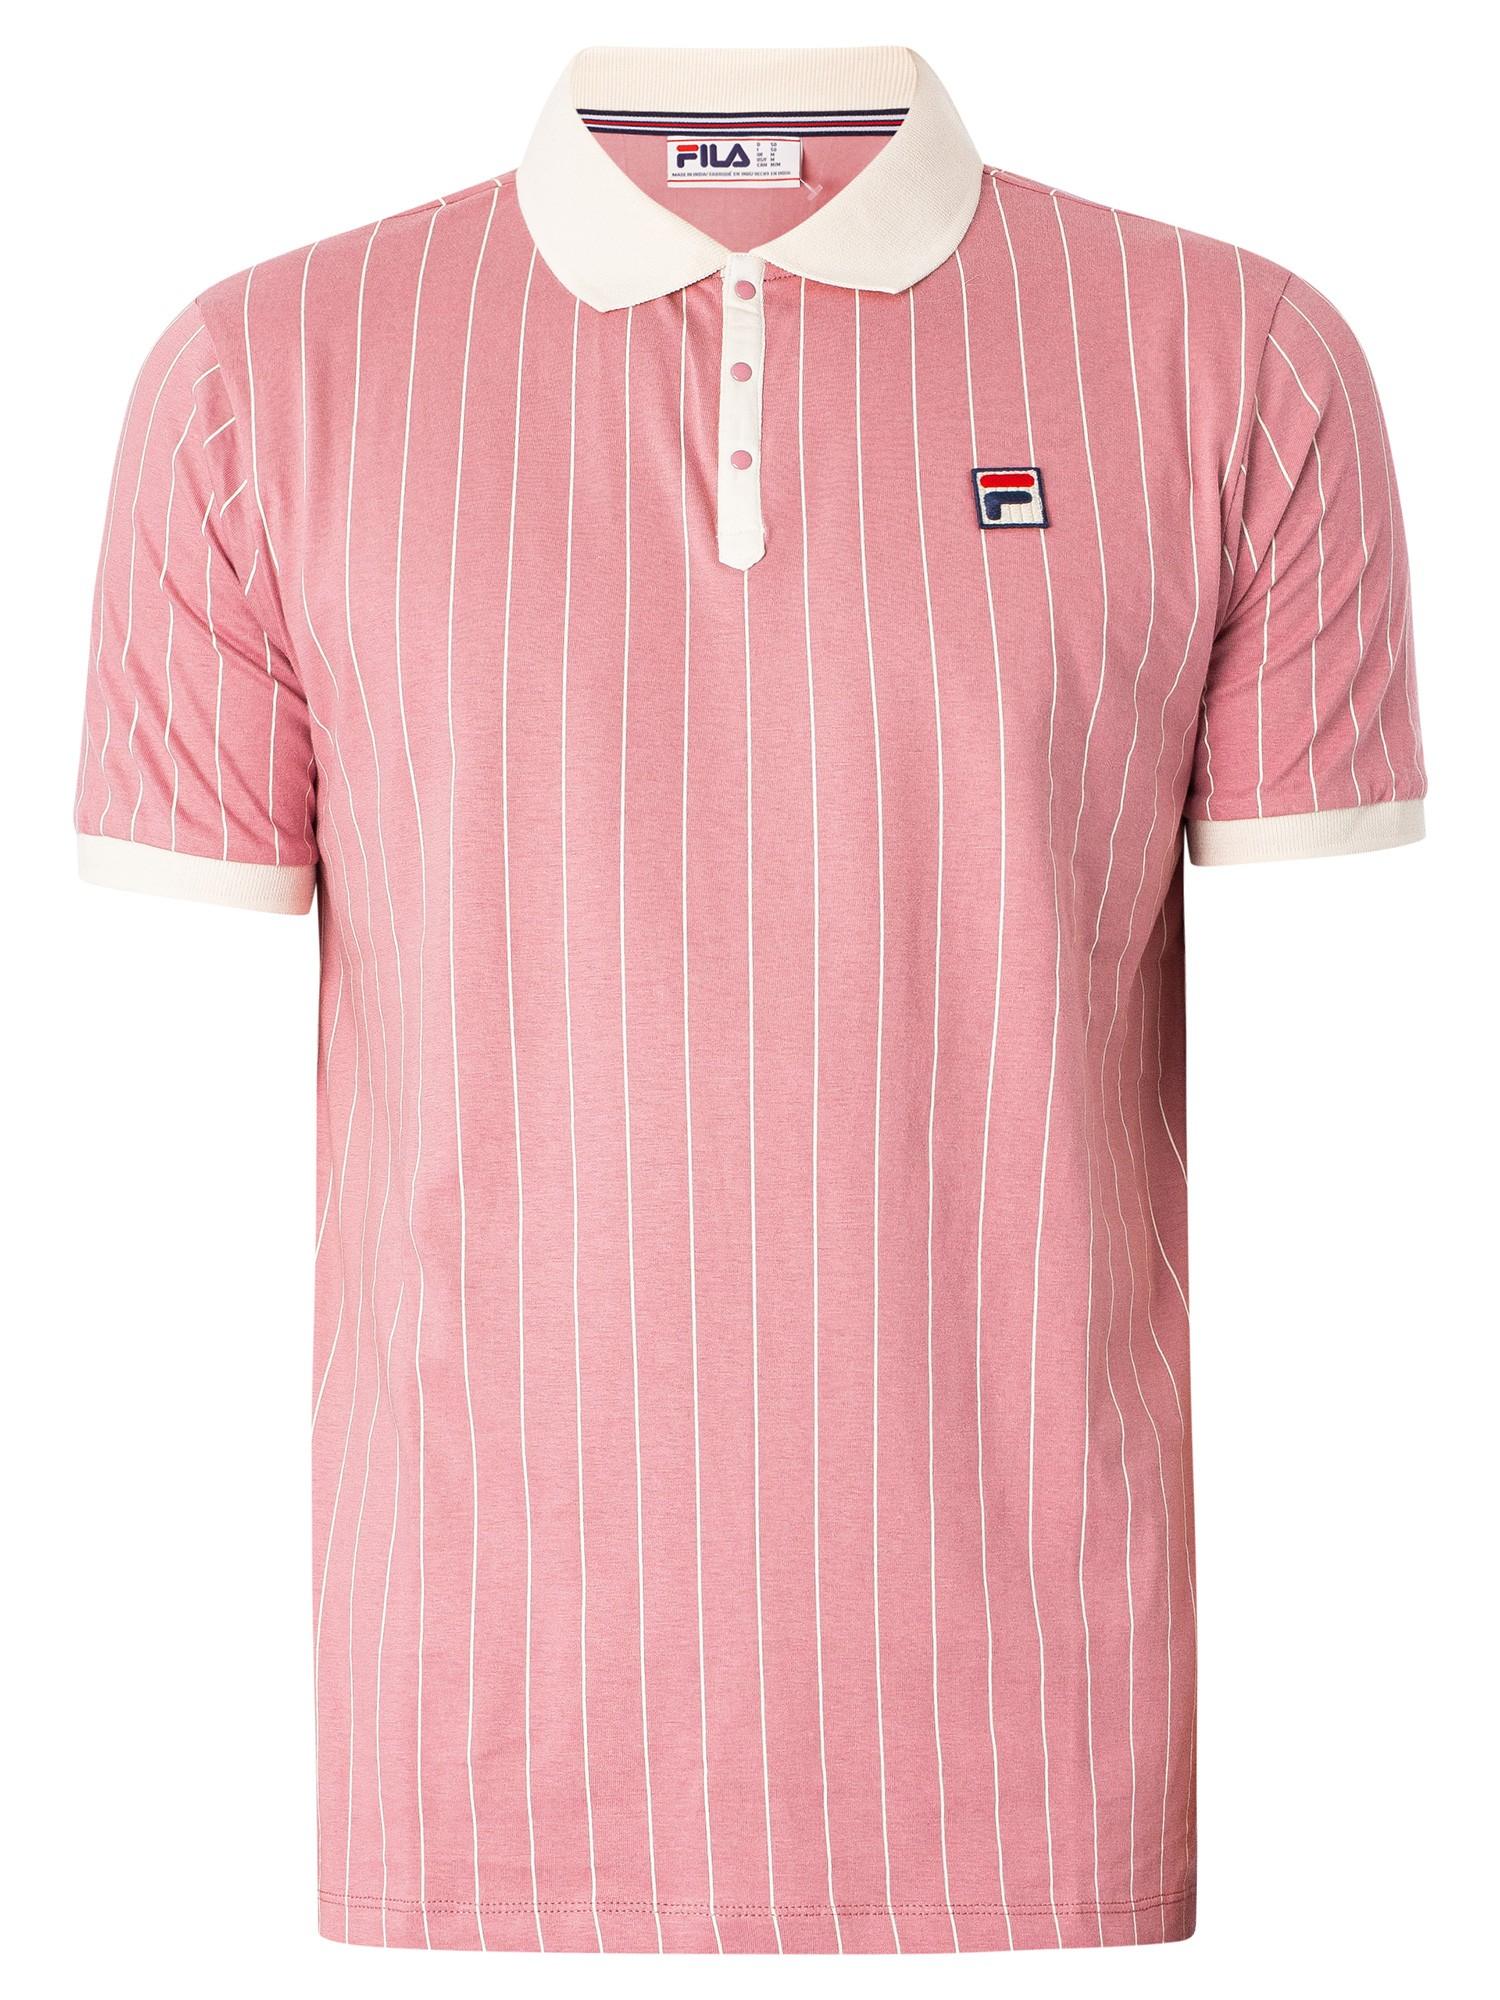 Fila Classic Vintage Striped Polo Shirt in Pink for Men | Lyst